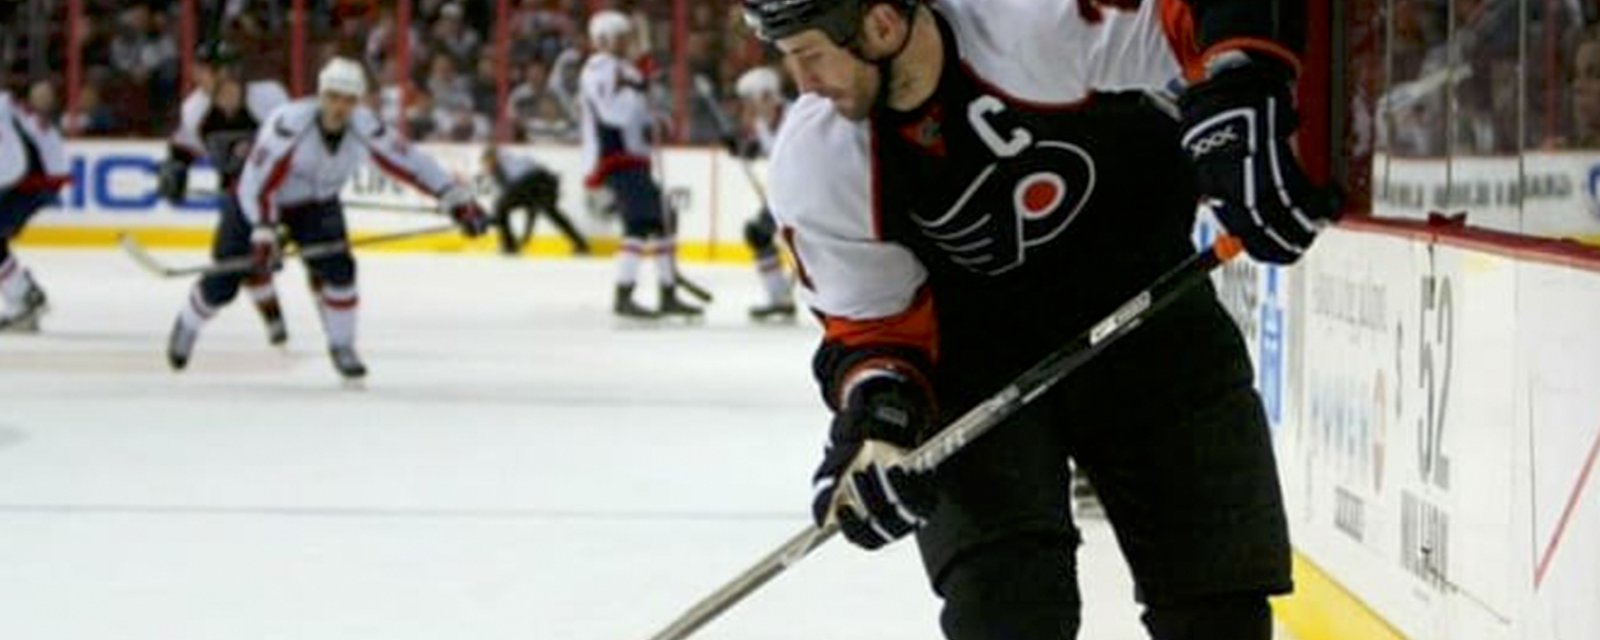 Philadelphia Flyers announce former captain is back within organization 